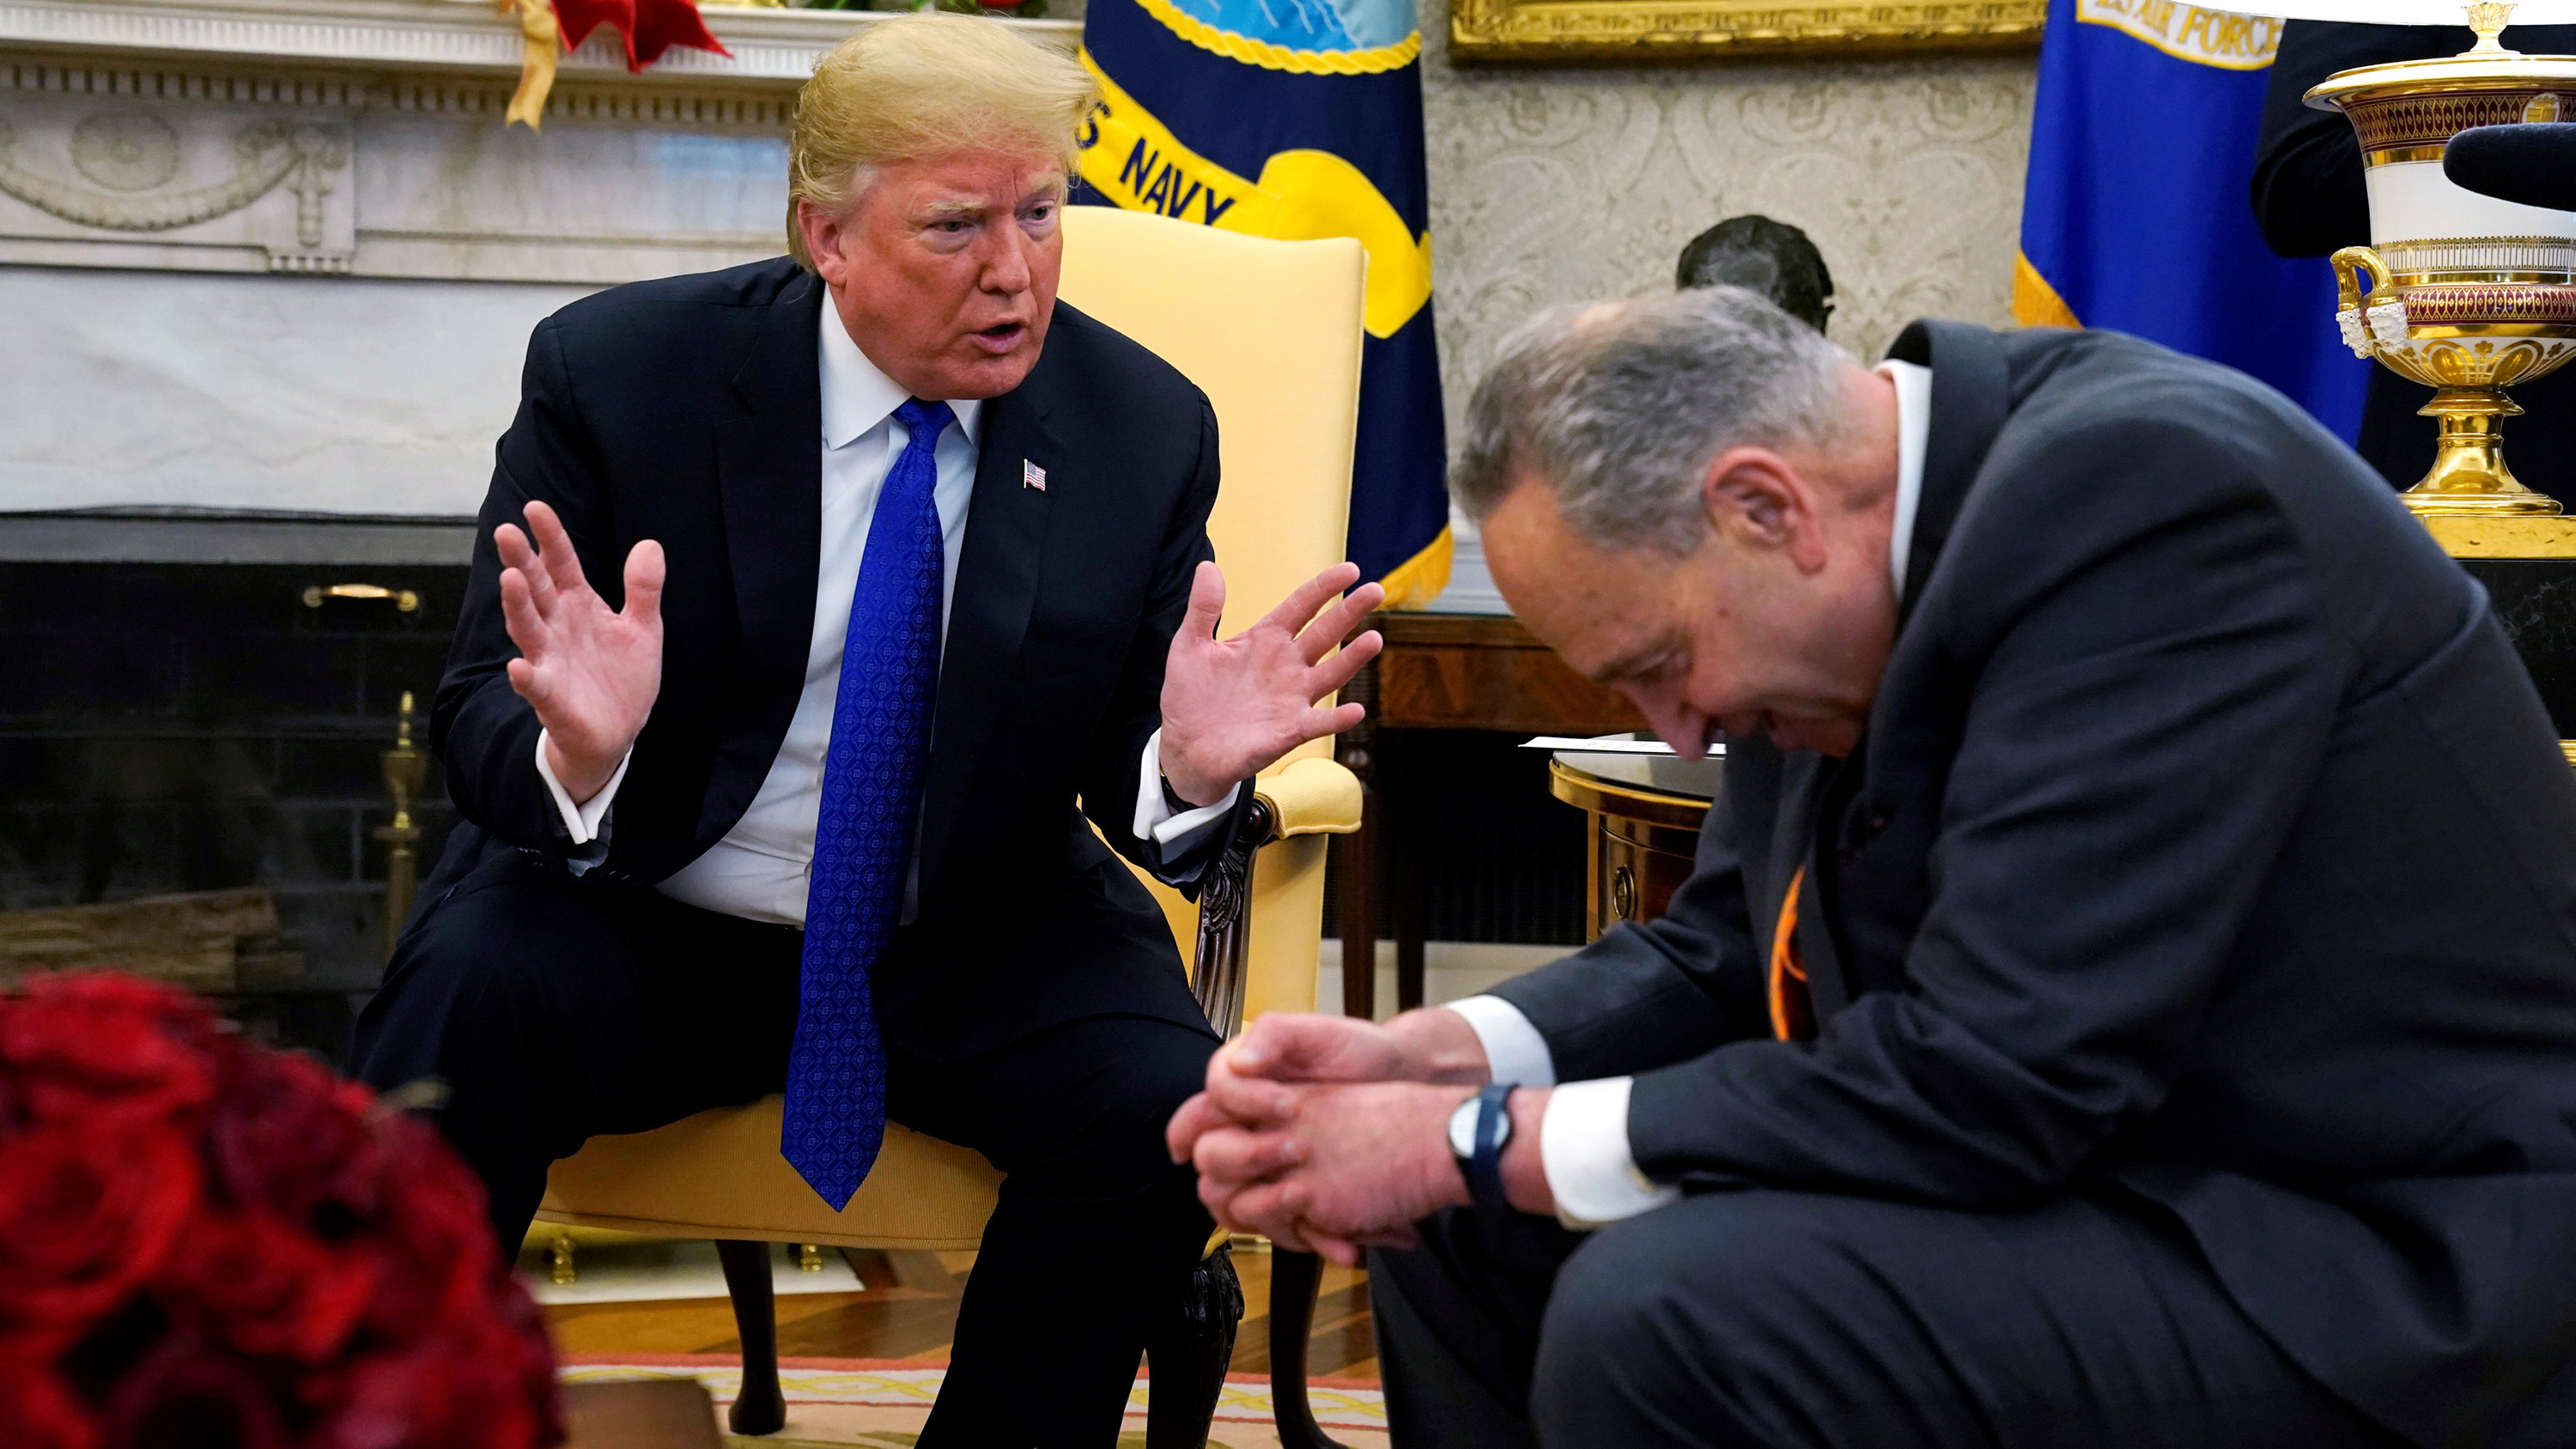 Us President Trump Meets With Schumer And Pelosi At The White House In Washington Cnn 3366